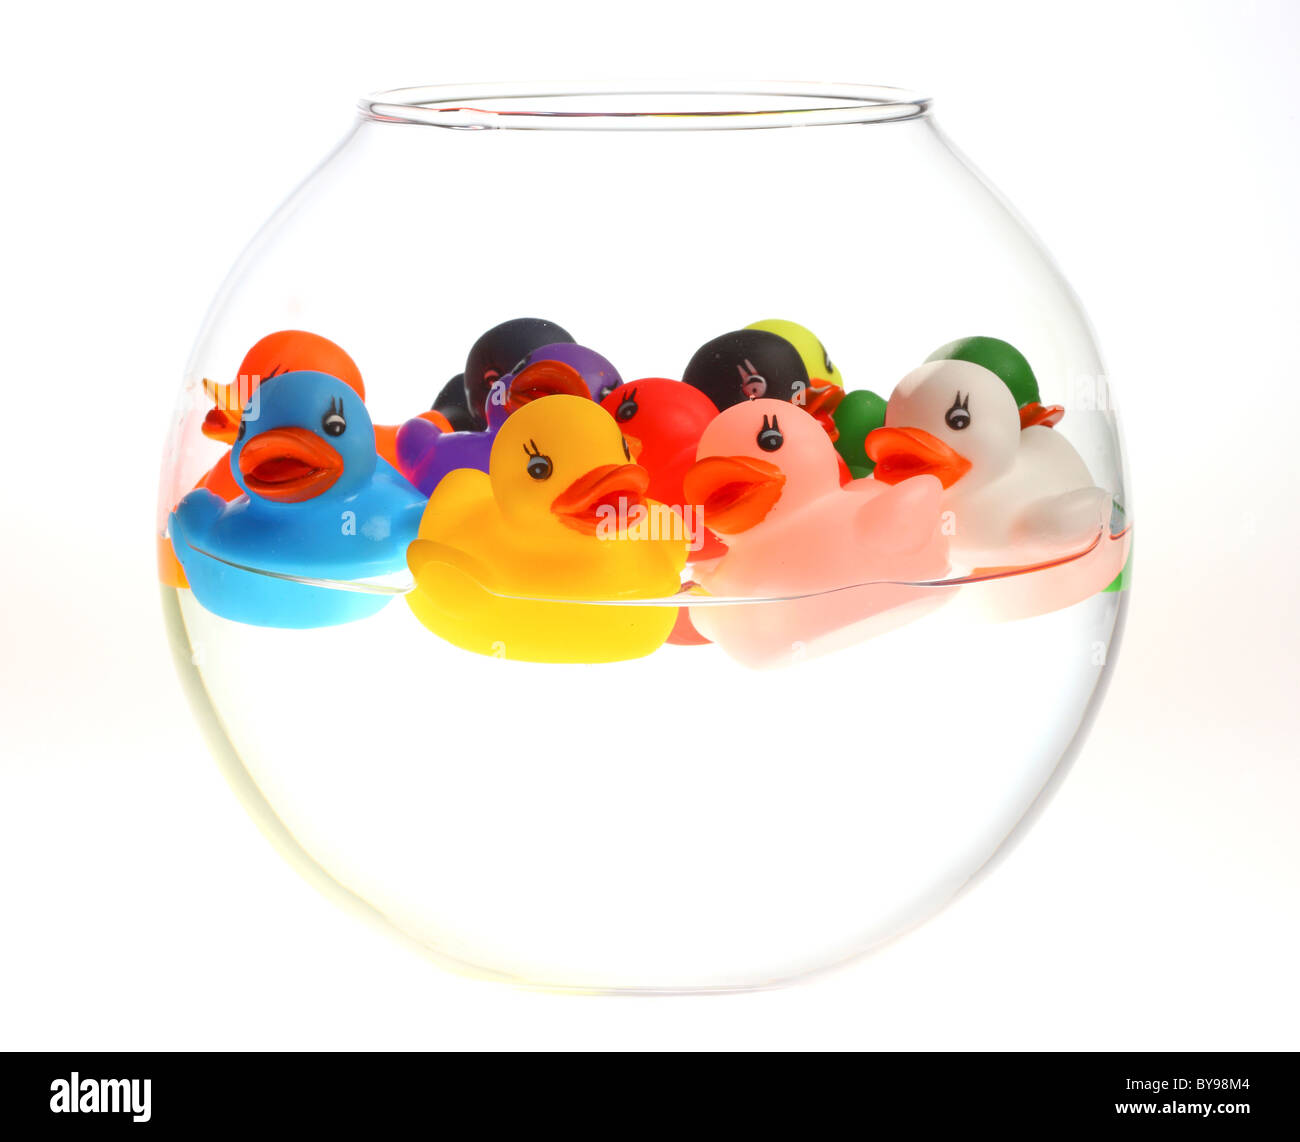 Rubber ducks in a fish bowl. Stock Photo